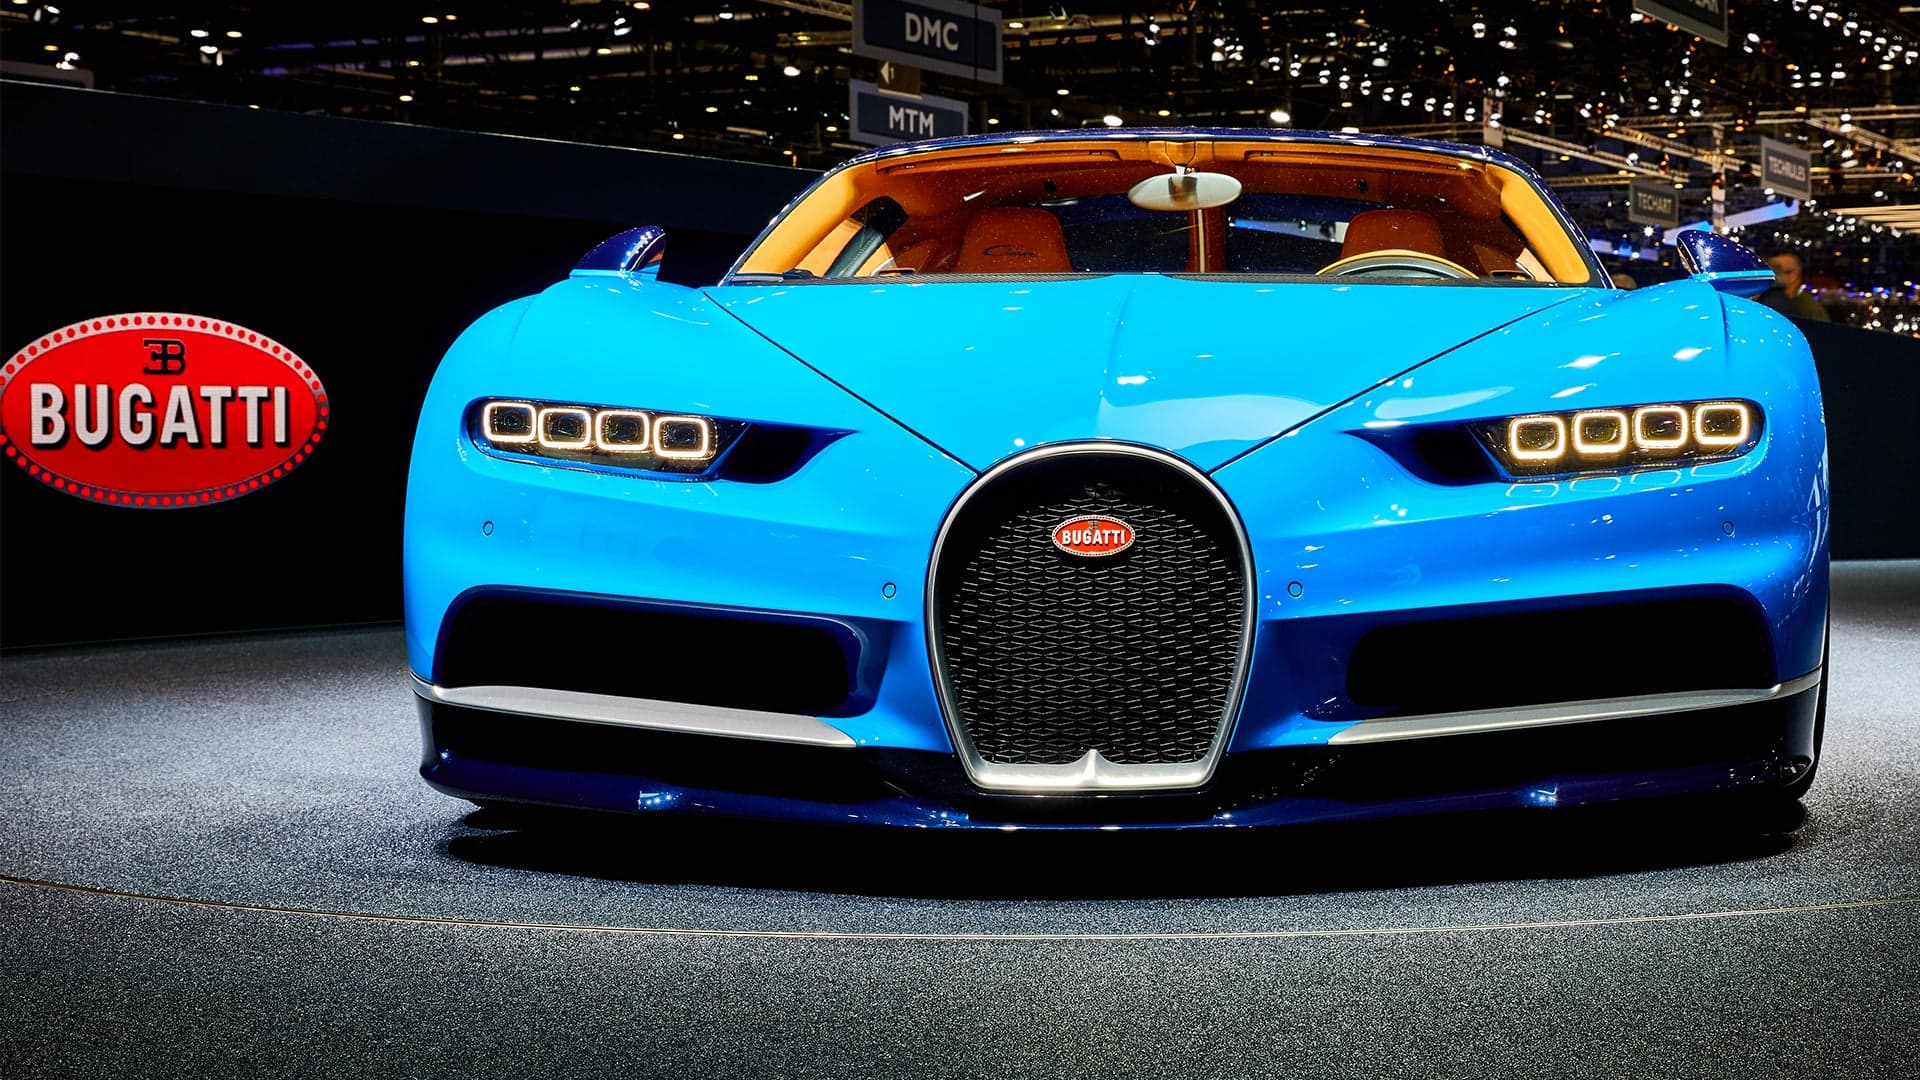 National Geographic Reveals How the Bugatti Chiron is Built